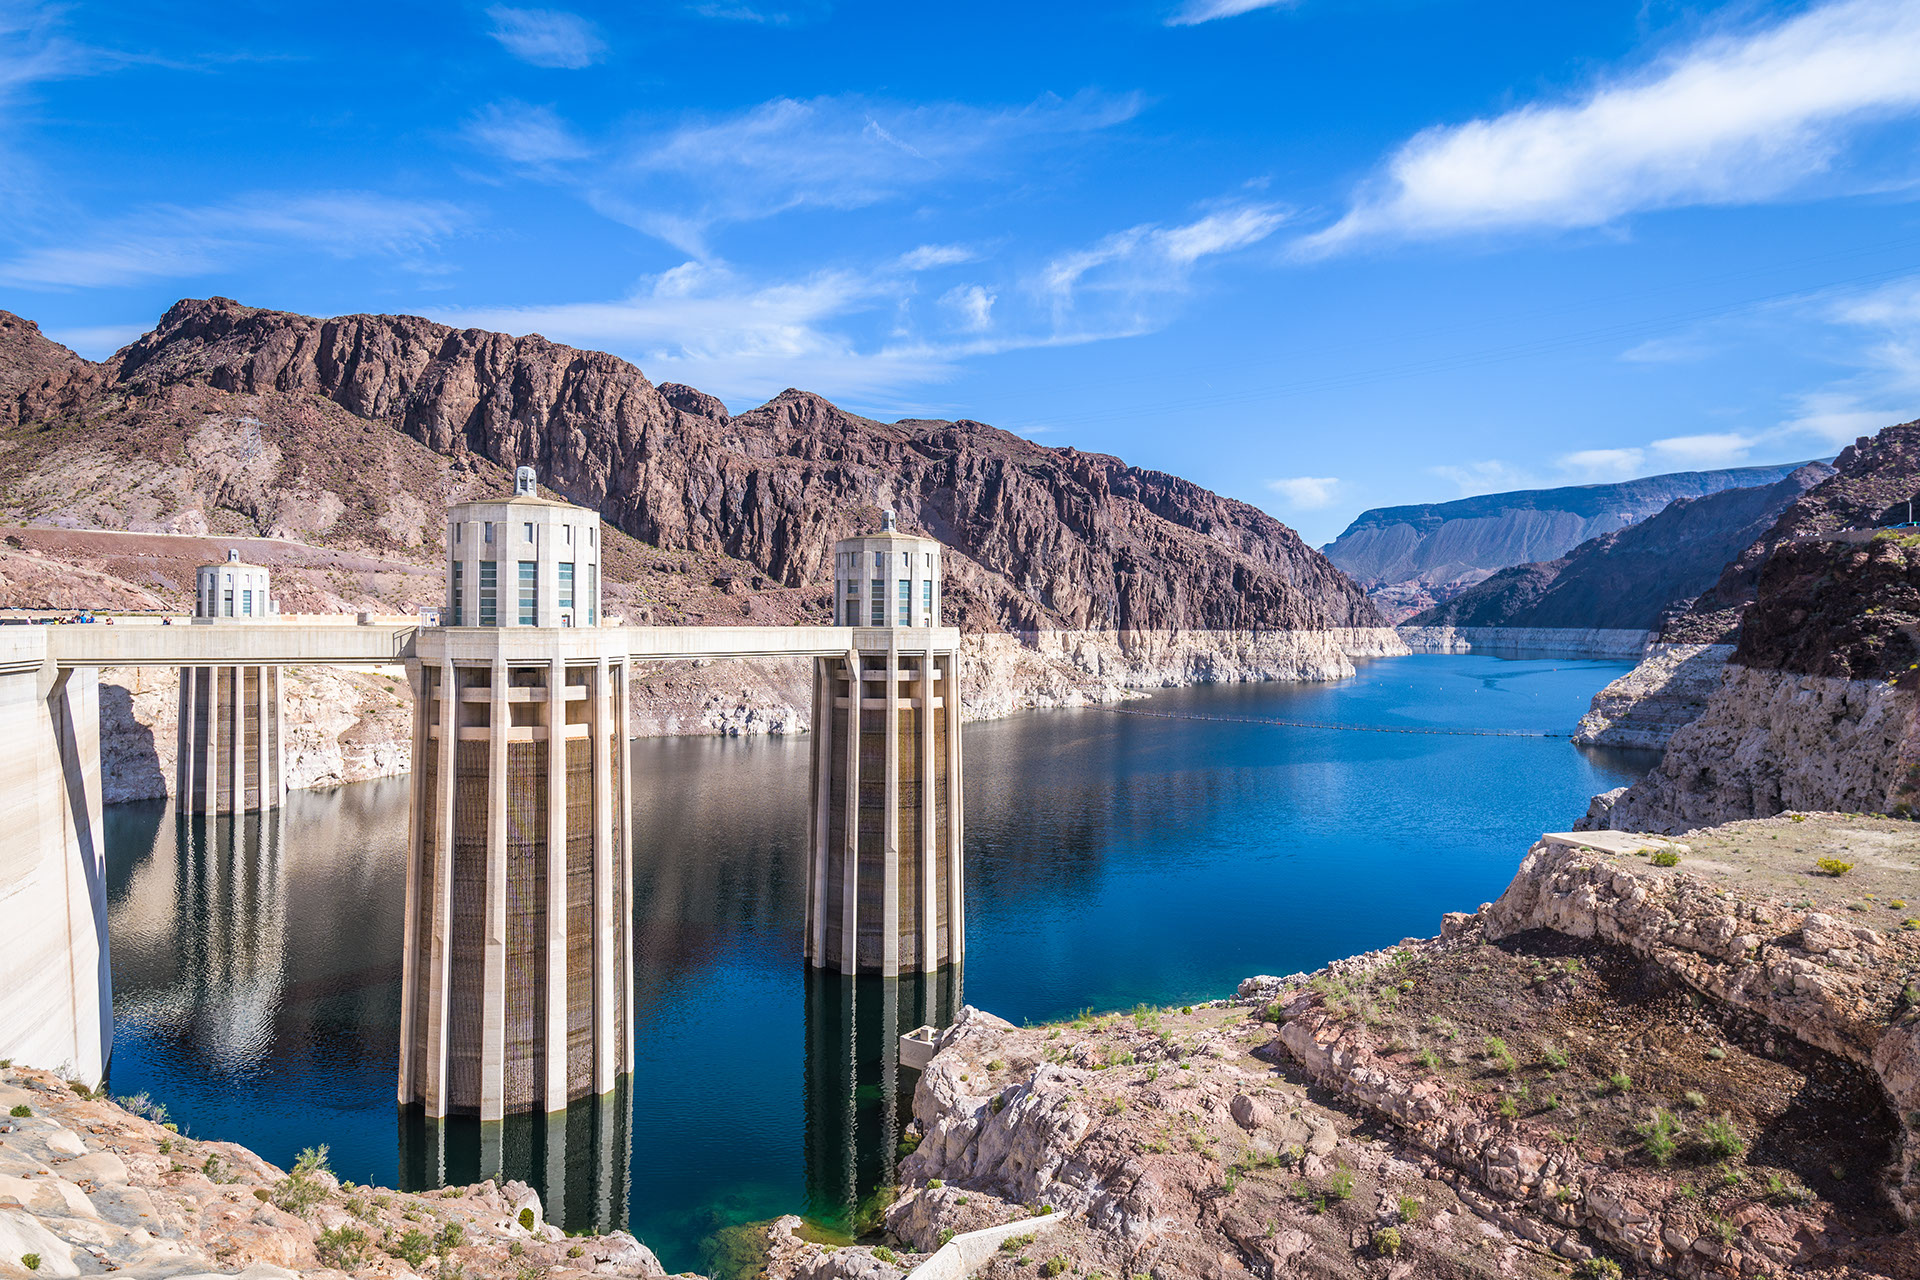 Lake Mead, Size and depth, Current water levels, Value for all, 1920x1280 HD Desktop